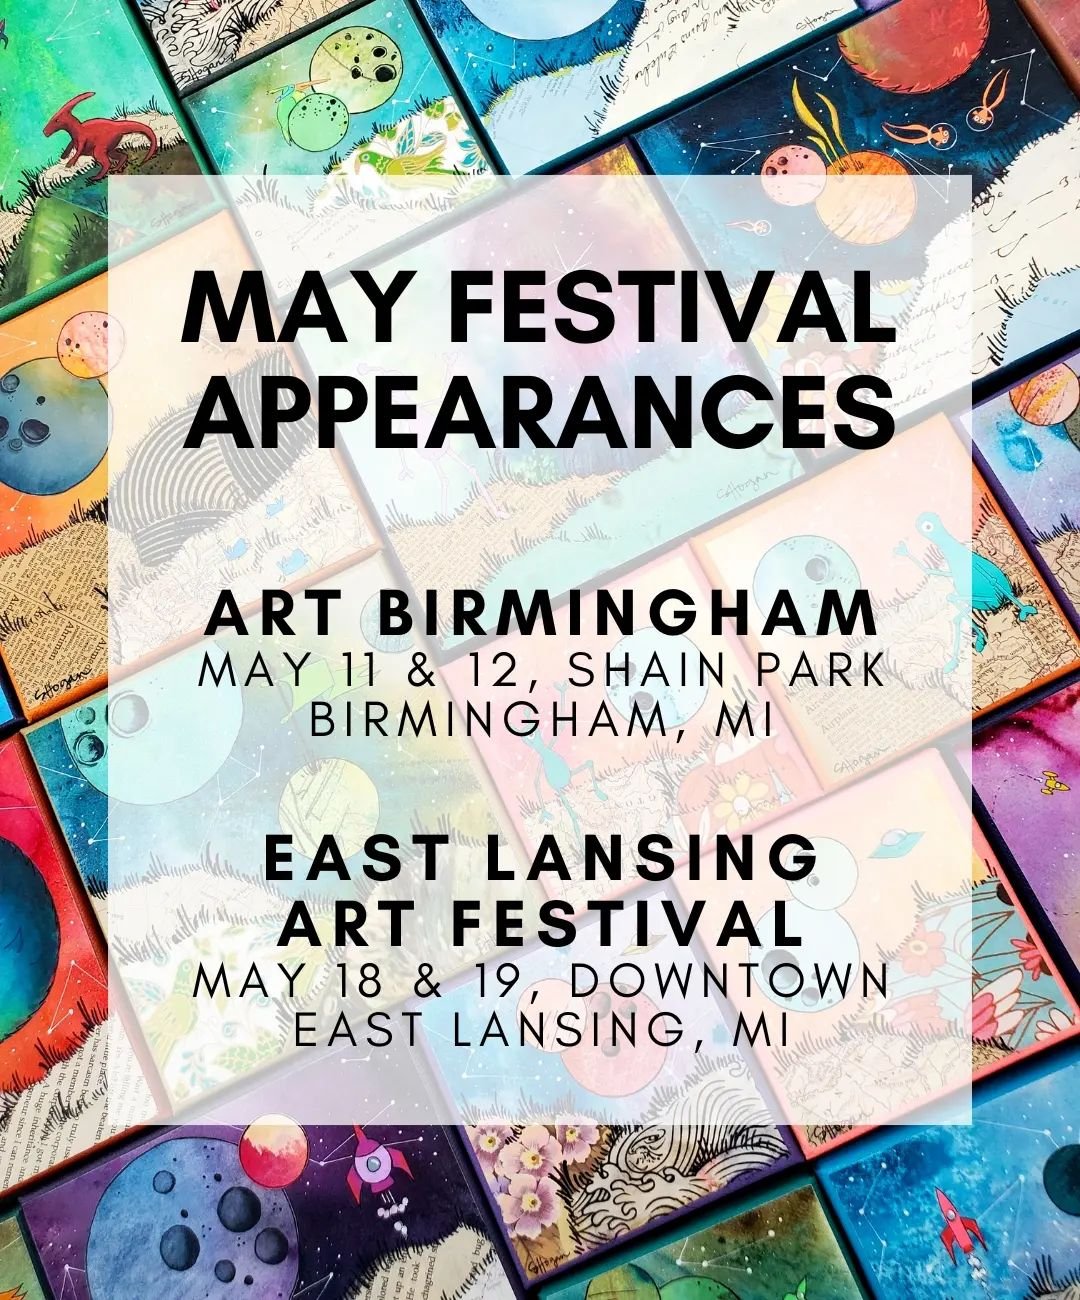 First shows of the season!⁠
⁠
Art Birmingham, May 11 &amp; 12⁠
Booth 52⁠
⁠
East Lansing Art Festival, May 18 &amp; 19⁠
Booth 63